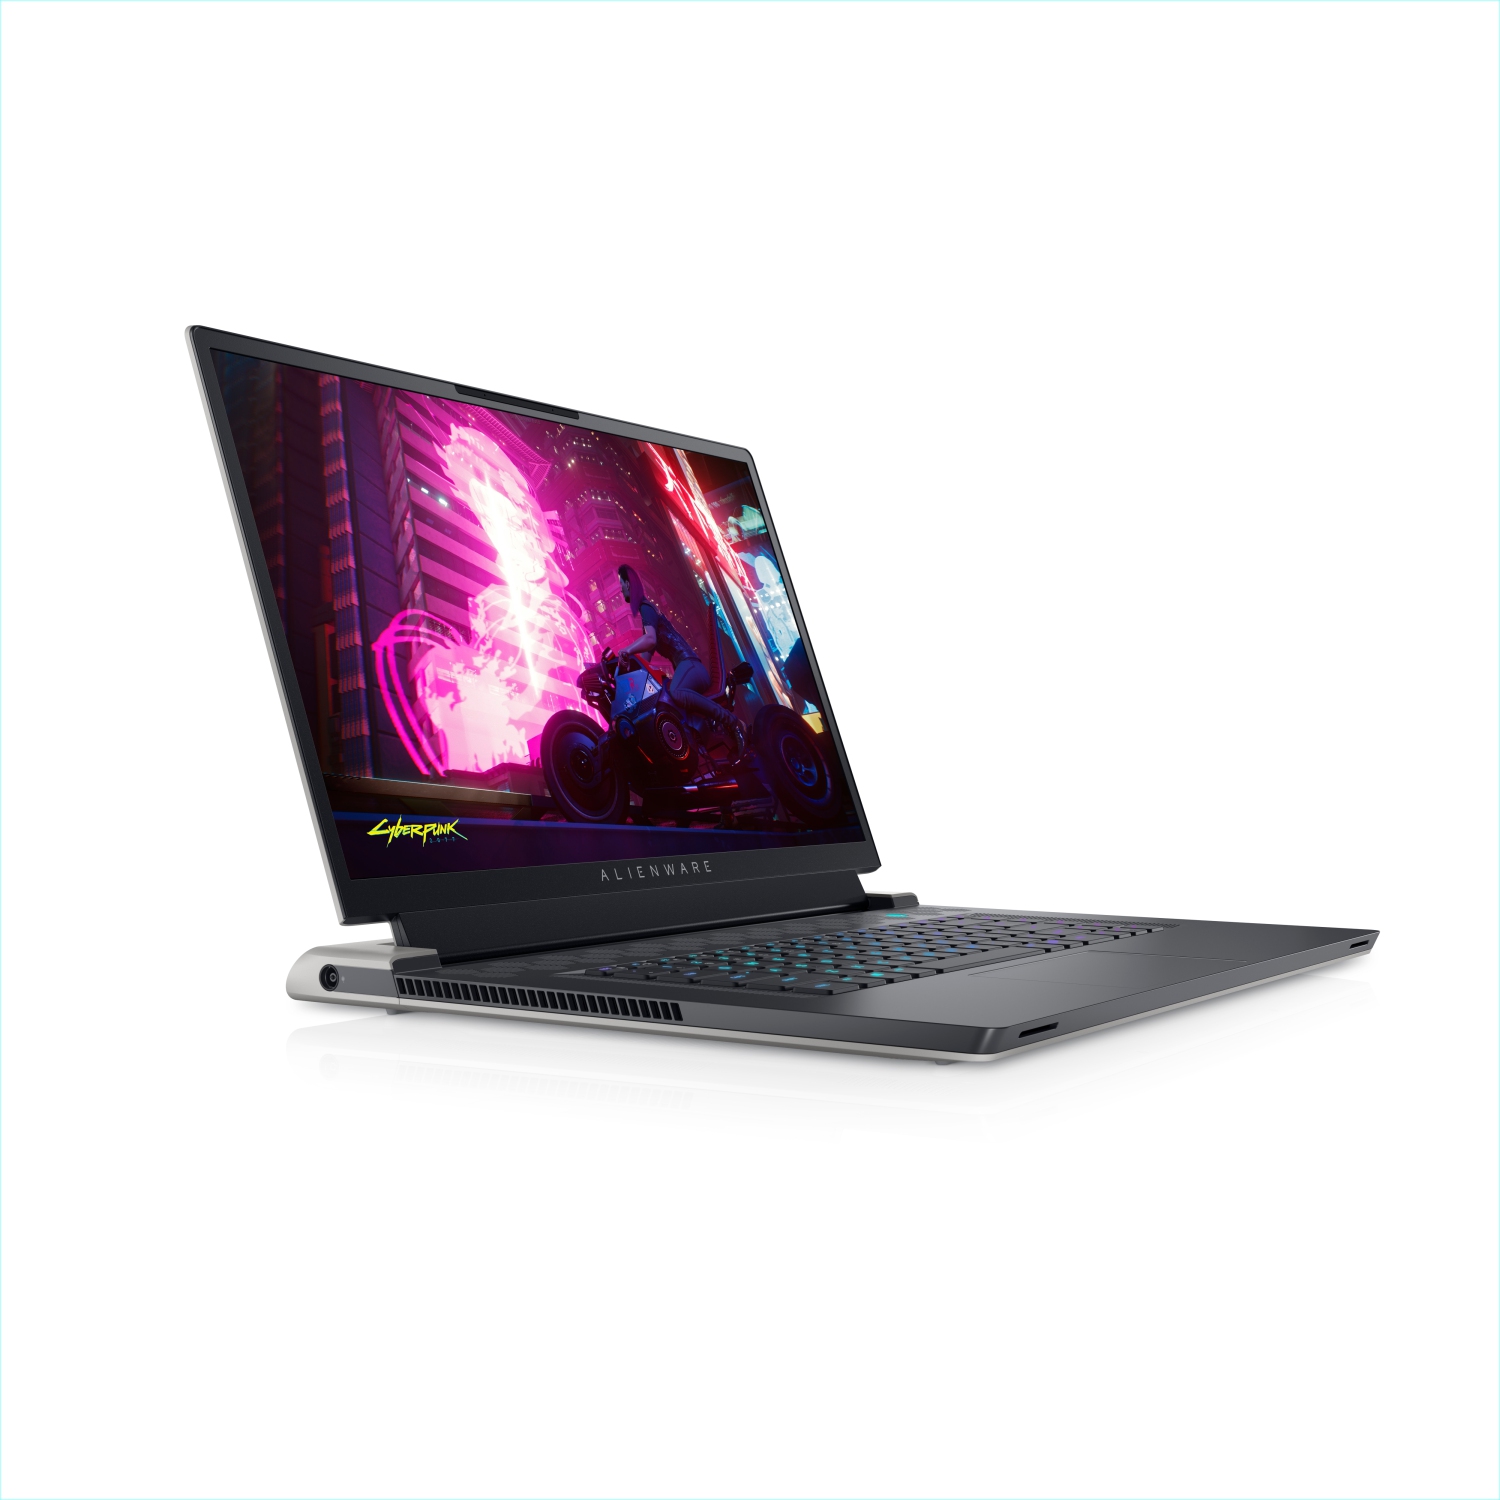 Refurbished (Excellent) - Dell Alienware X17 R1 Gaming Laptop (2021), 17.3" 4K, Core i9, 2TB SSD + 2TB SSD, 64GB RAM, RTX 3080, 8 Cores @ 5 GHz, 11th Gen CPU Certified